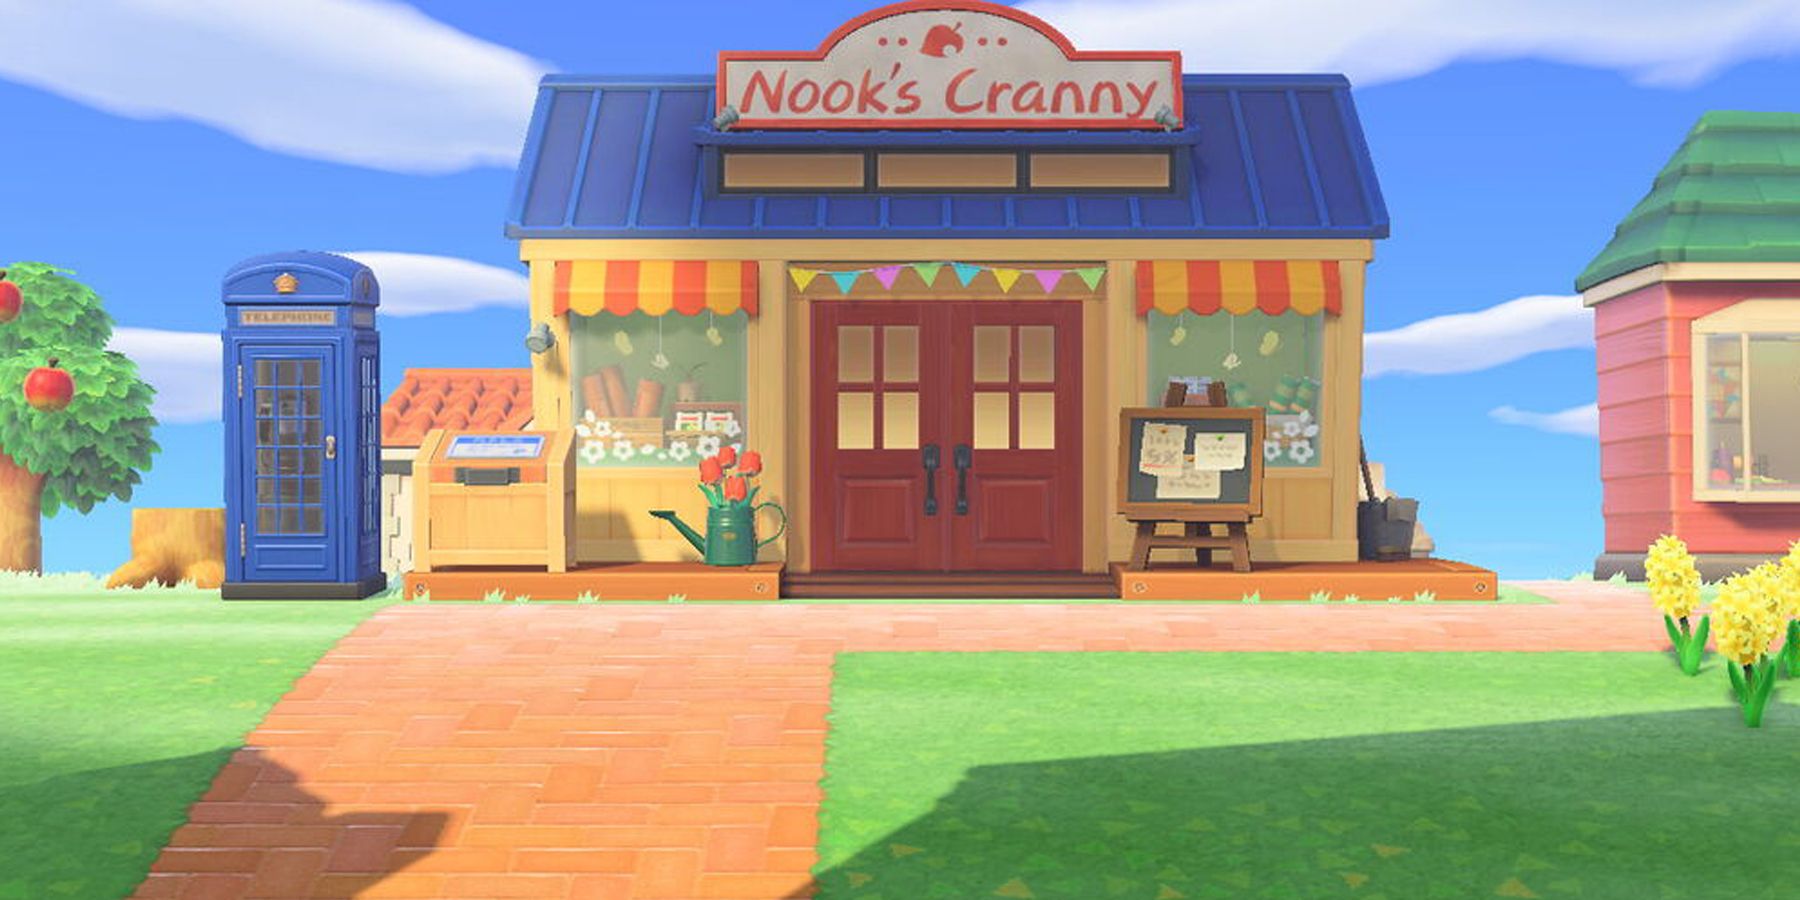 Nook's Cranny from Animal Crossing: New Horizons.